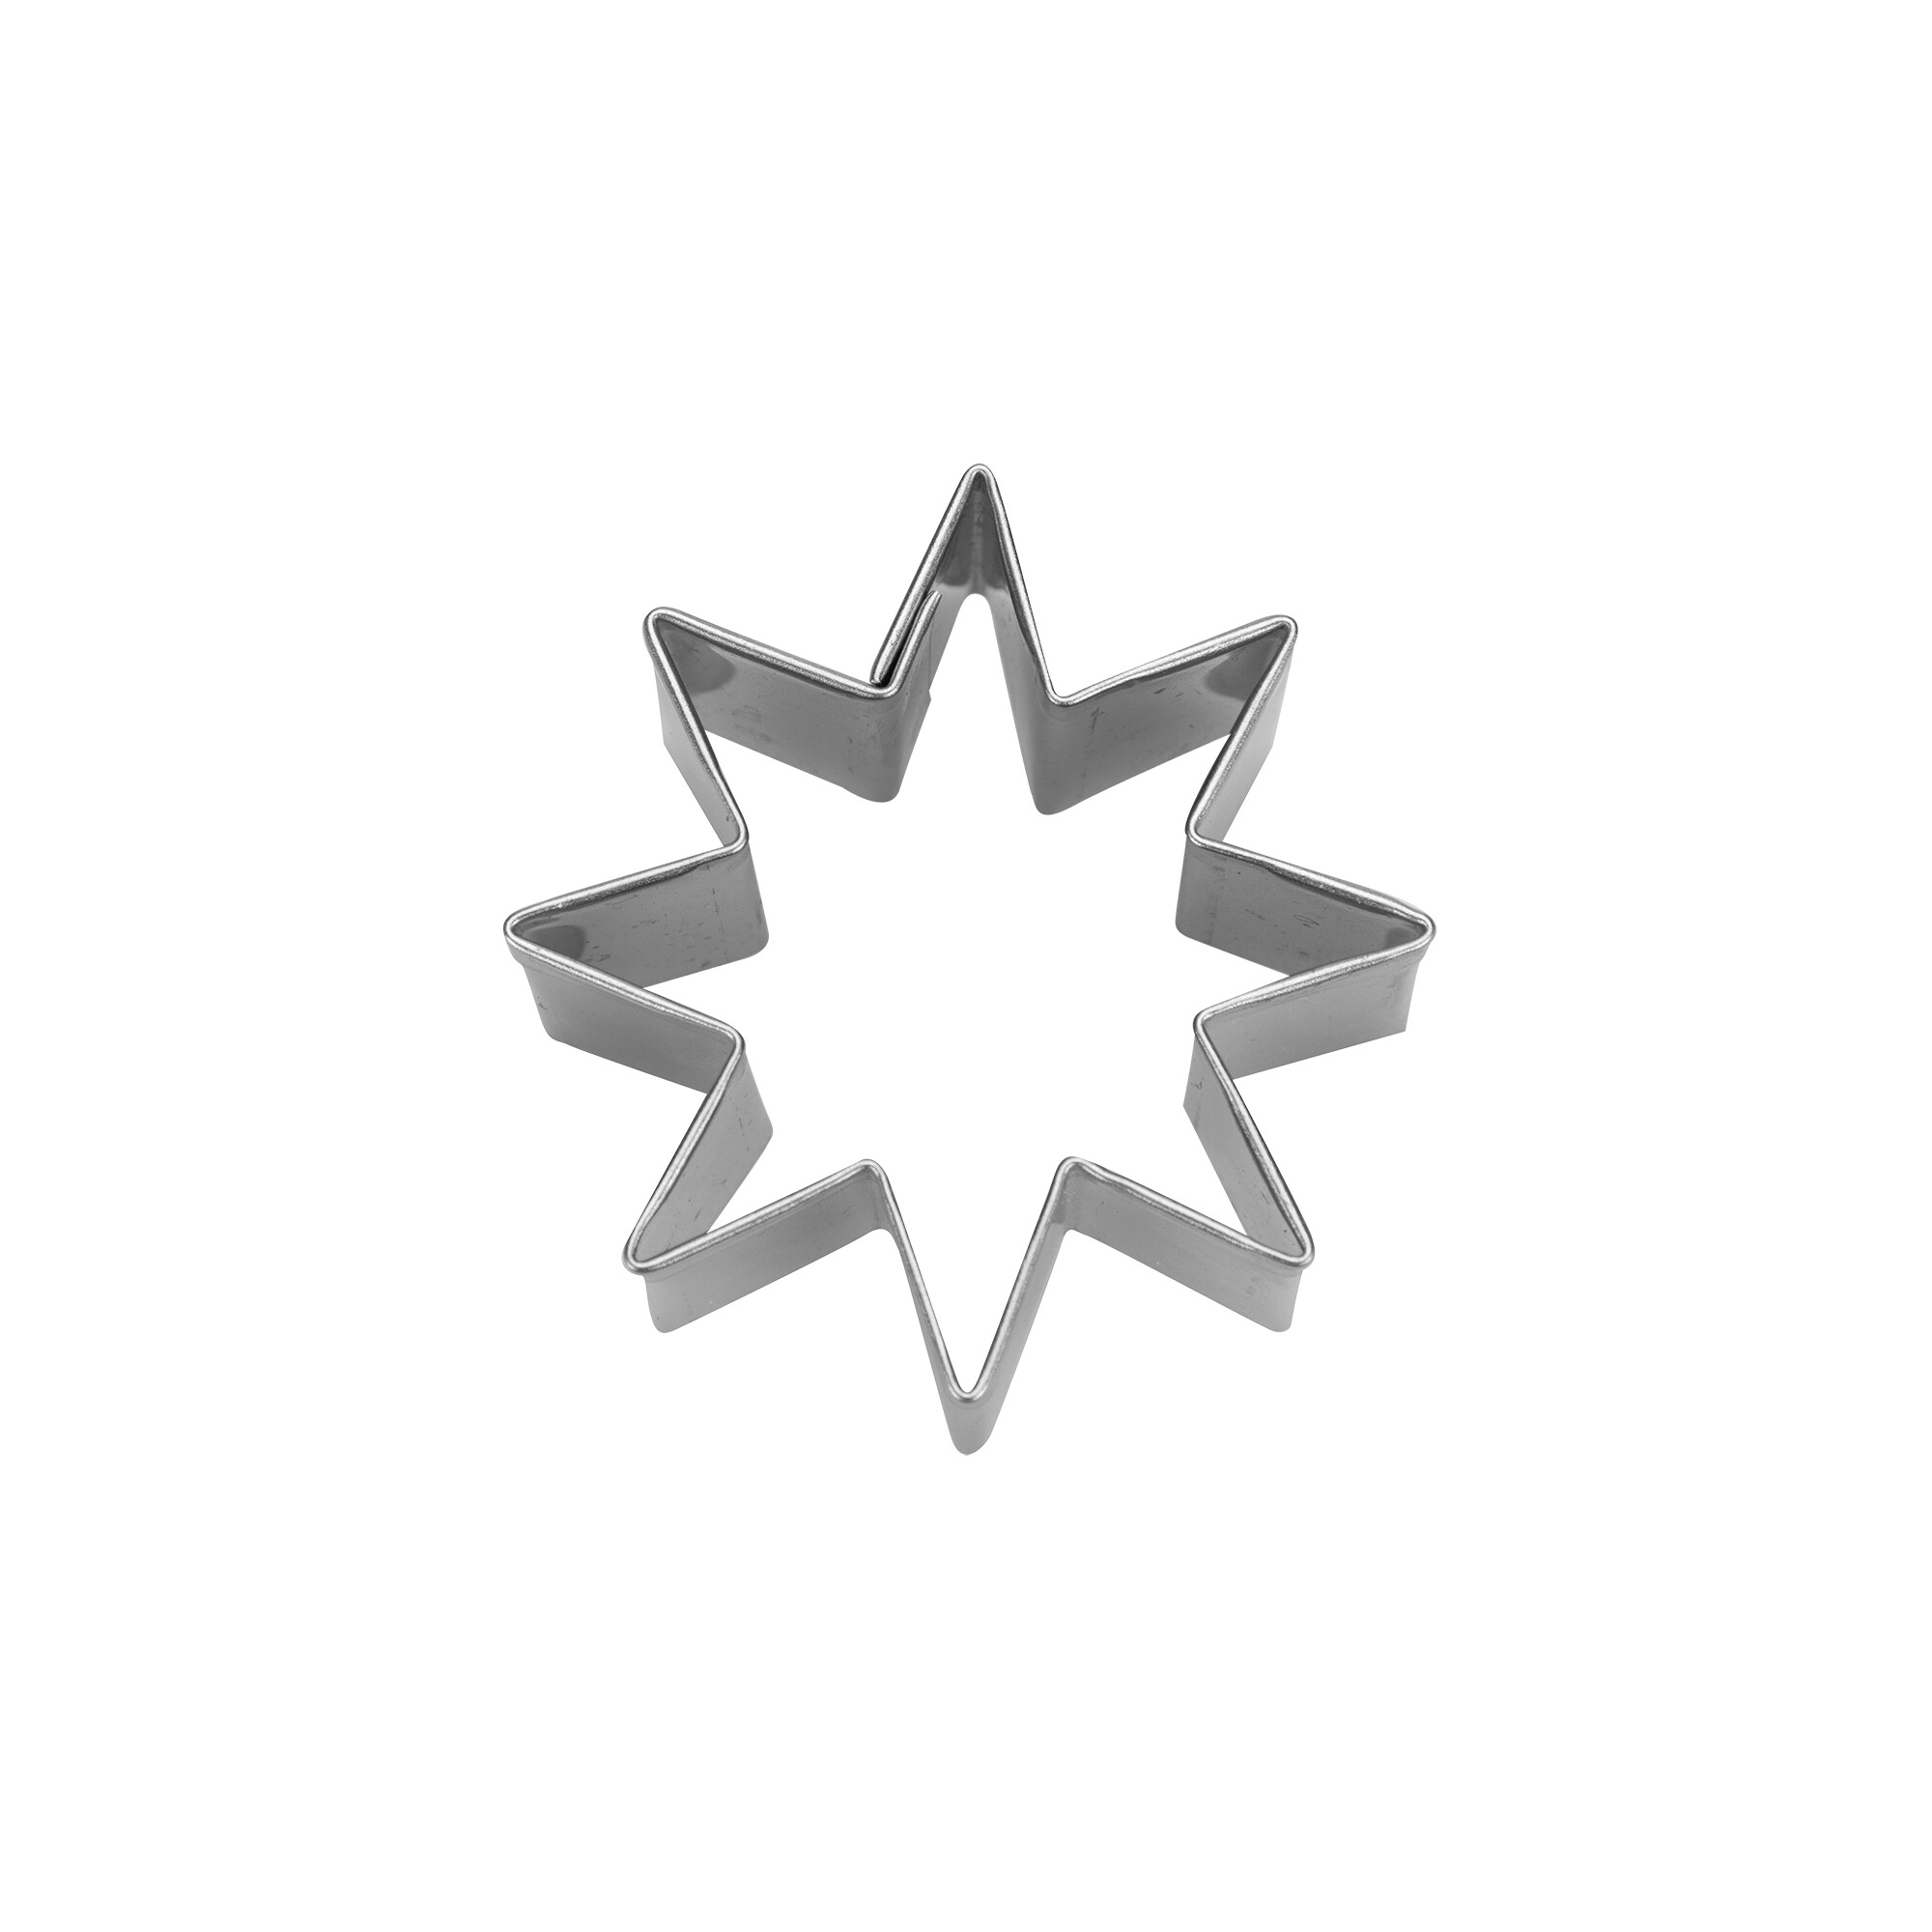 Star – 8-pointed